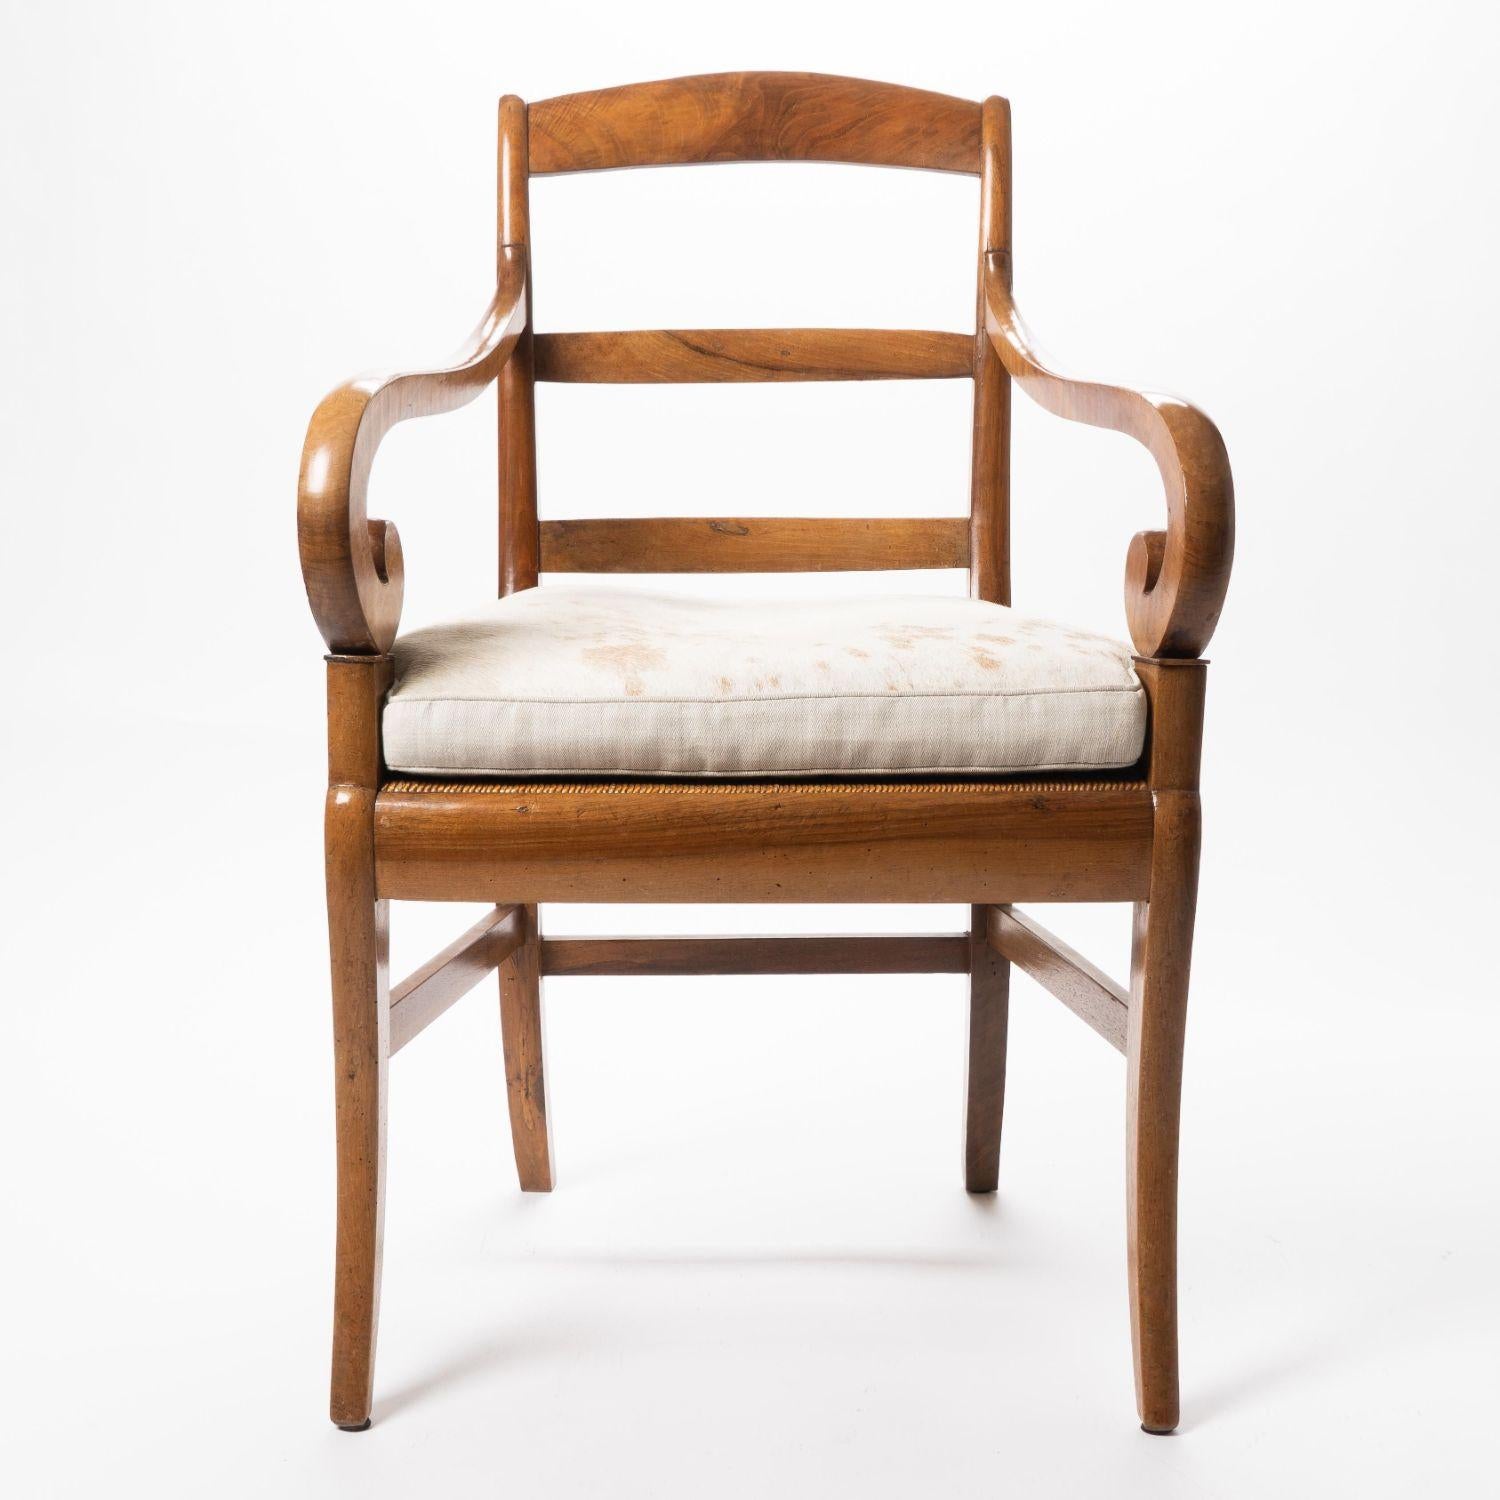 French Cherry Wood Arm Chair with Rush Seat and Upholstered Cushion, c. 1830 For Sale 2